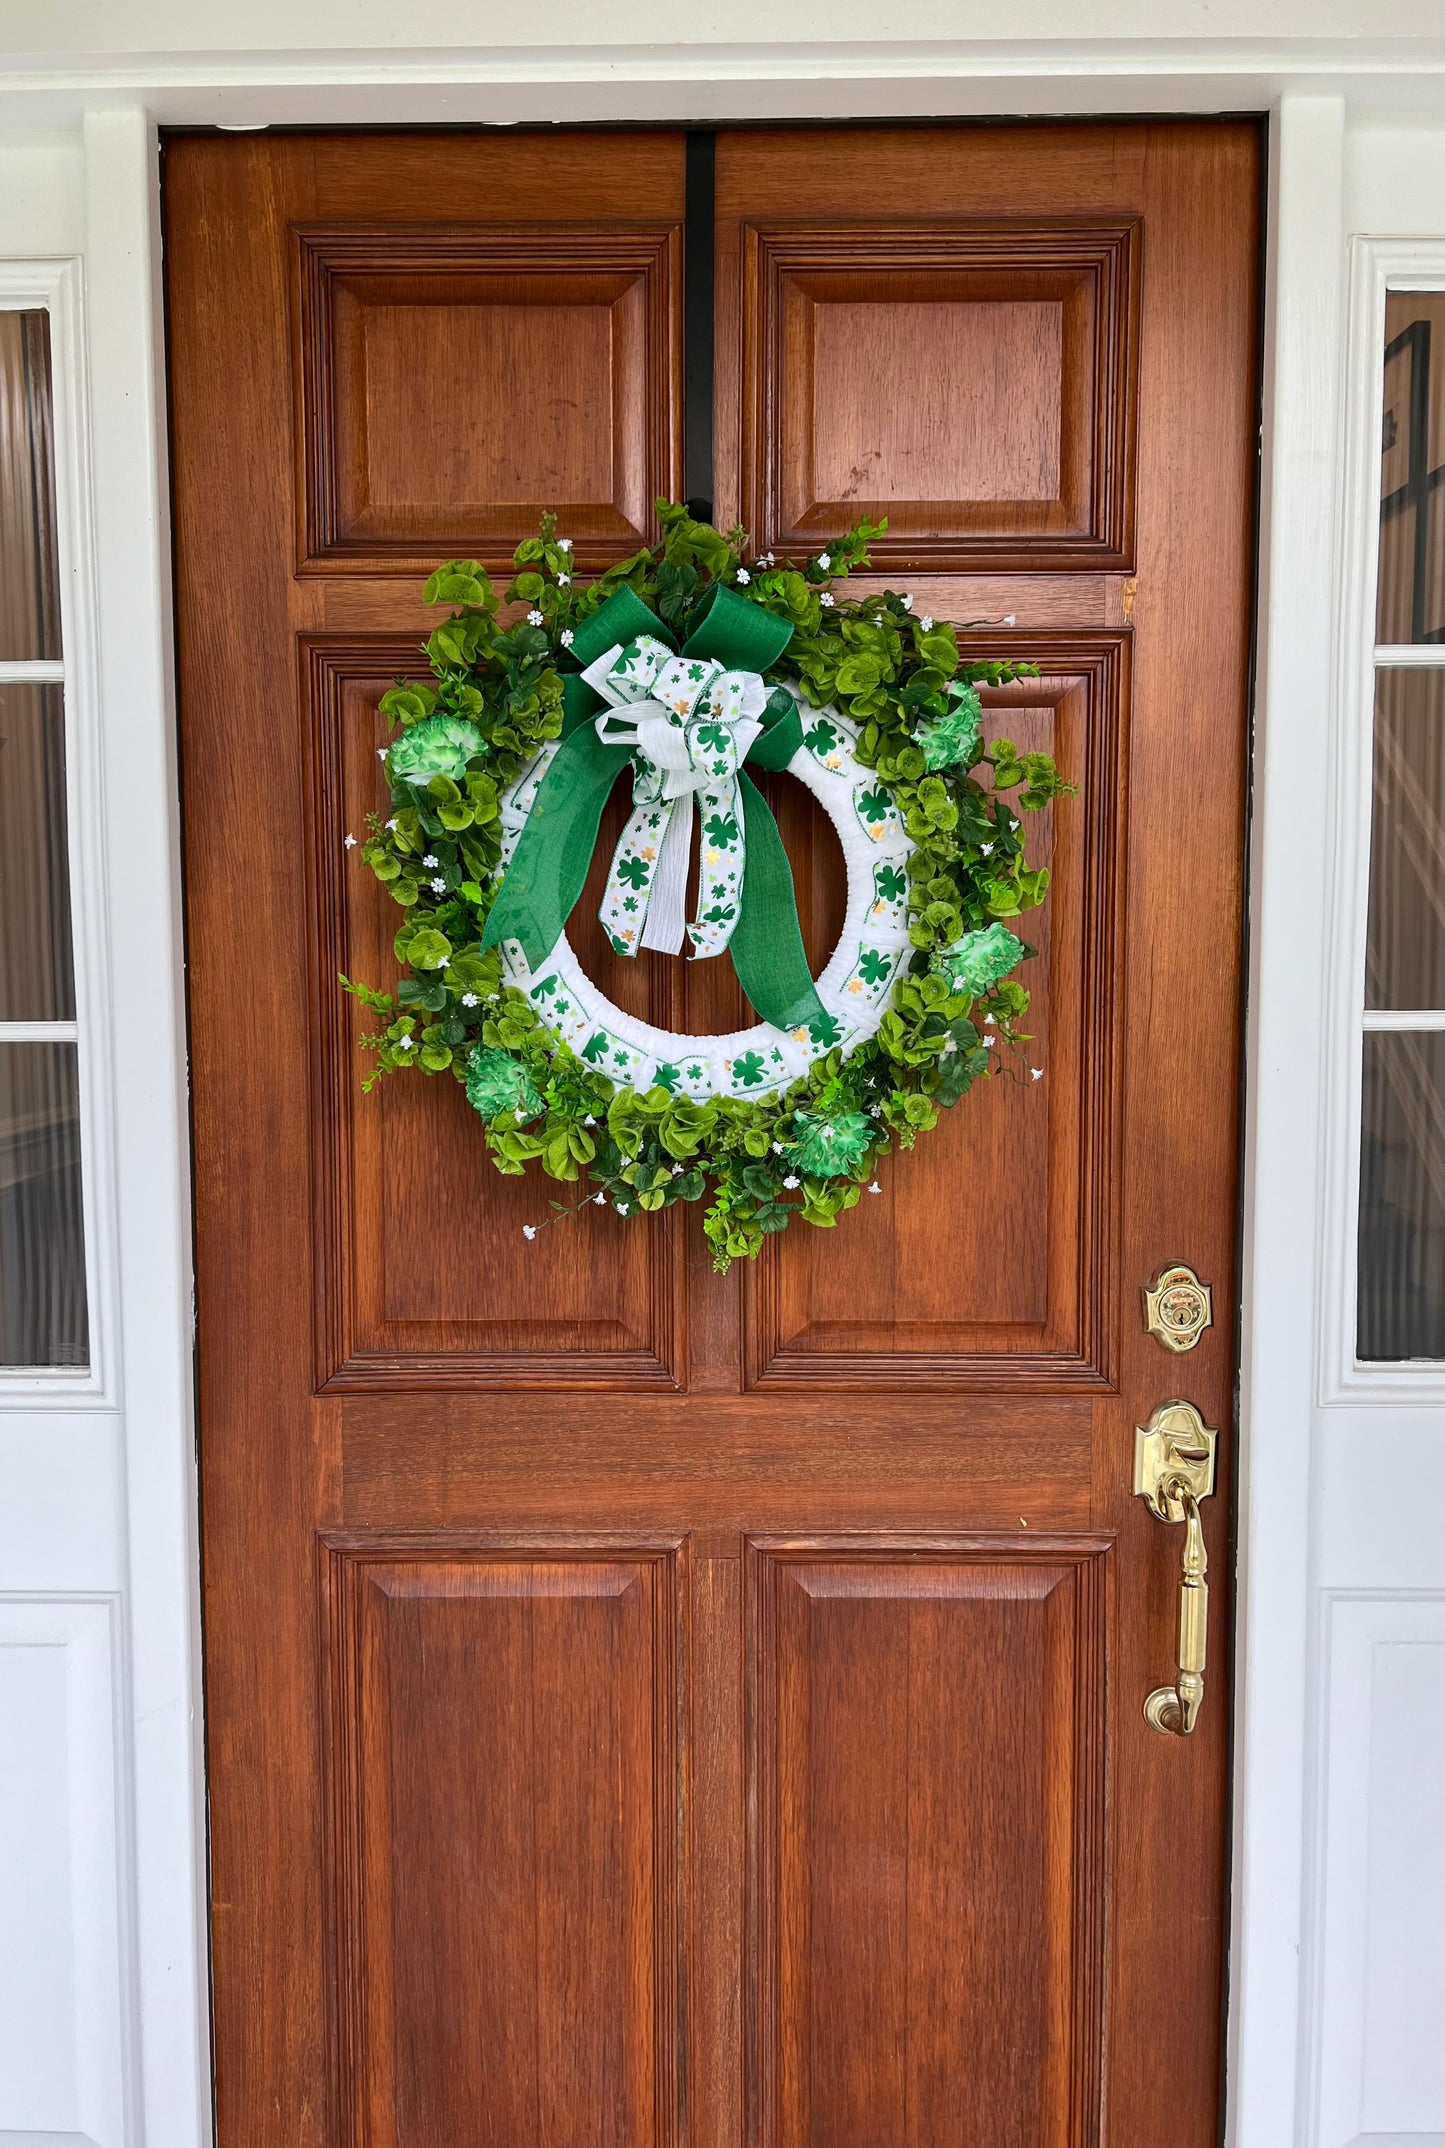 Unique 22" St. Patrick's Day Wreath with Bells of Ireland